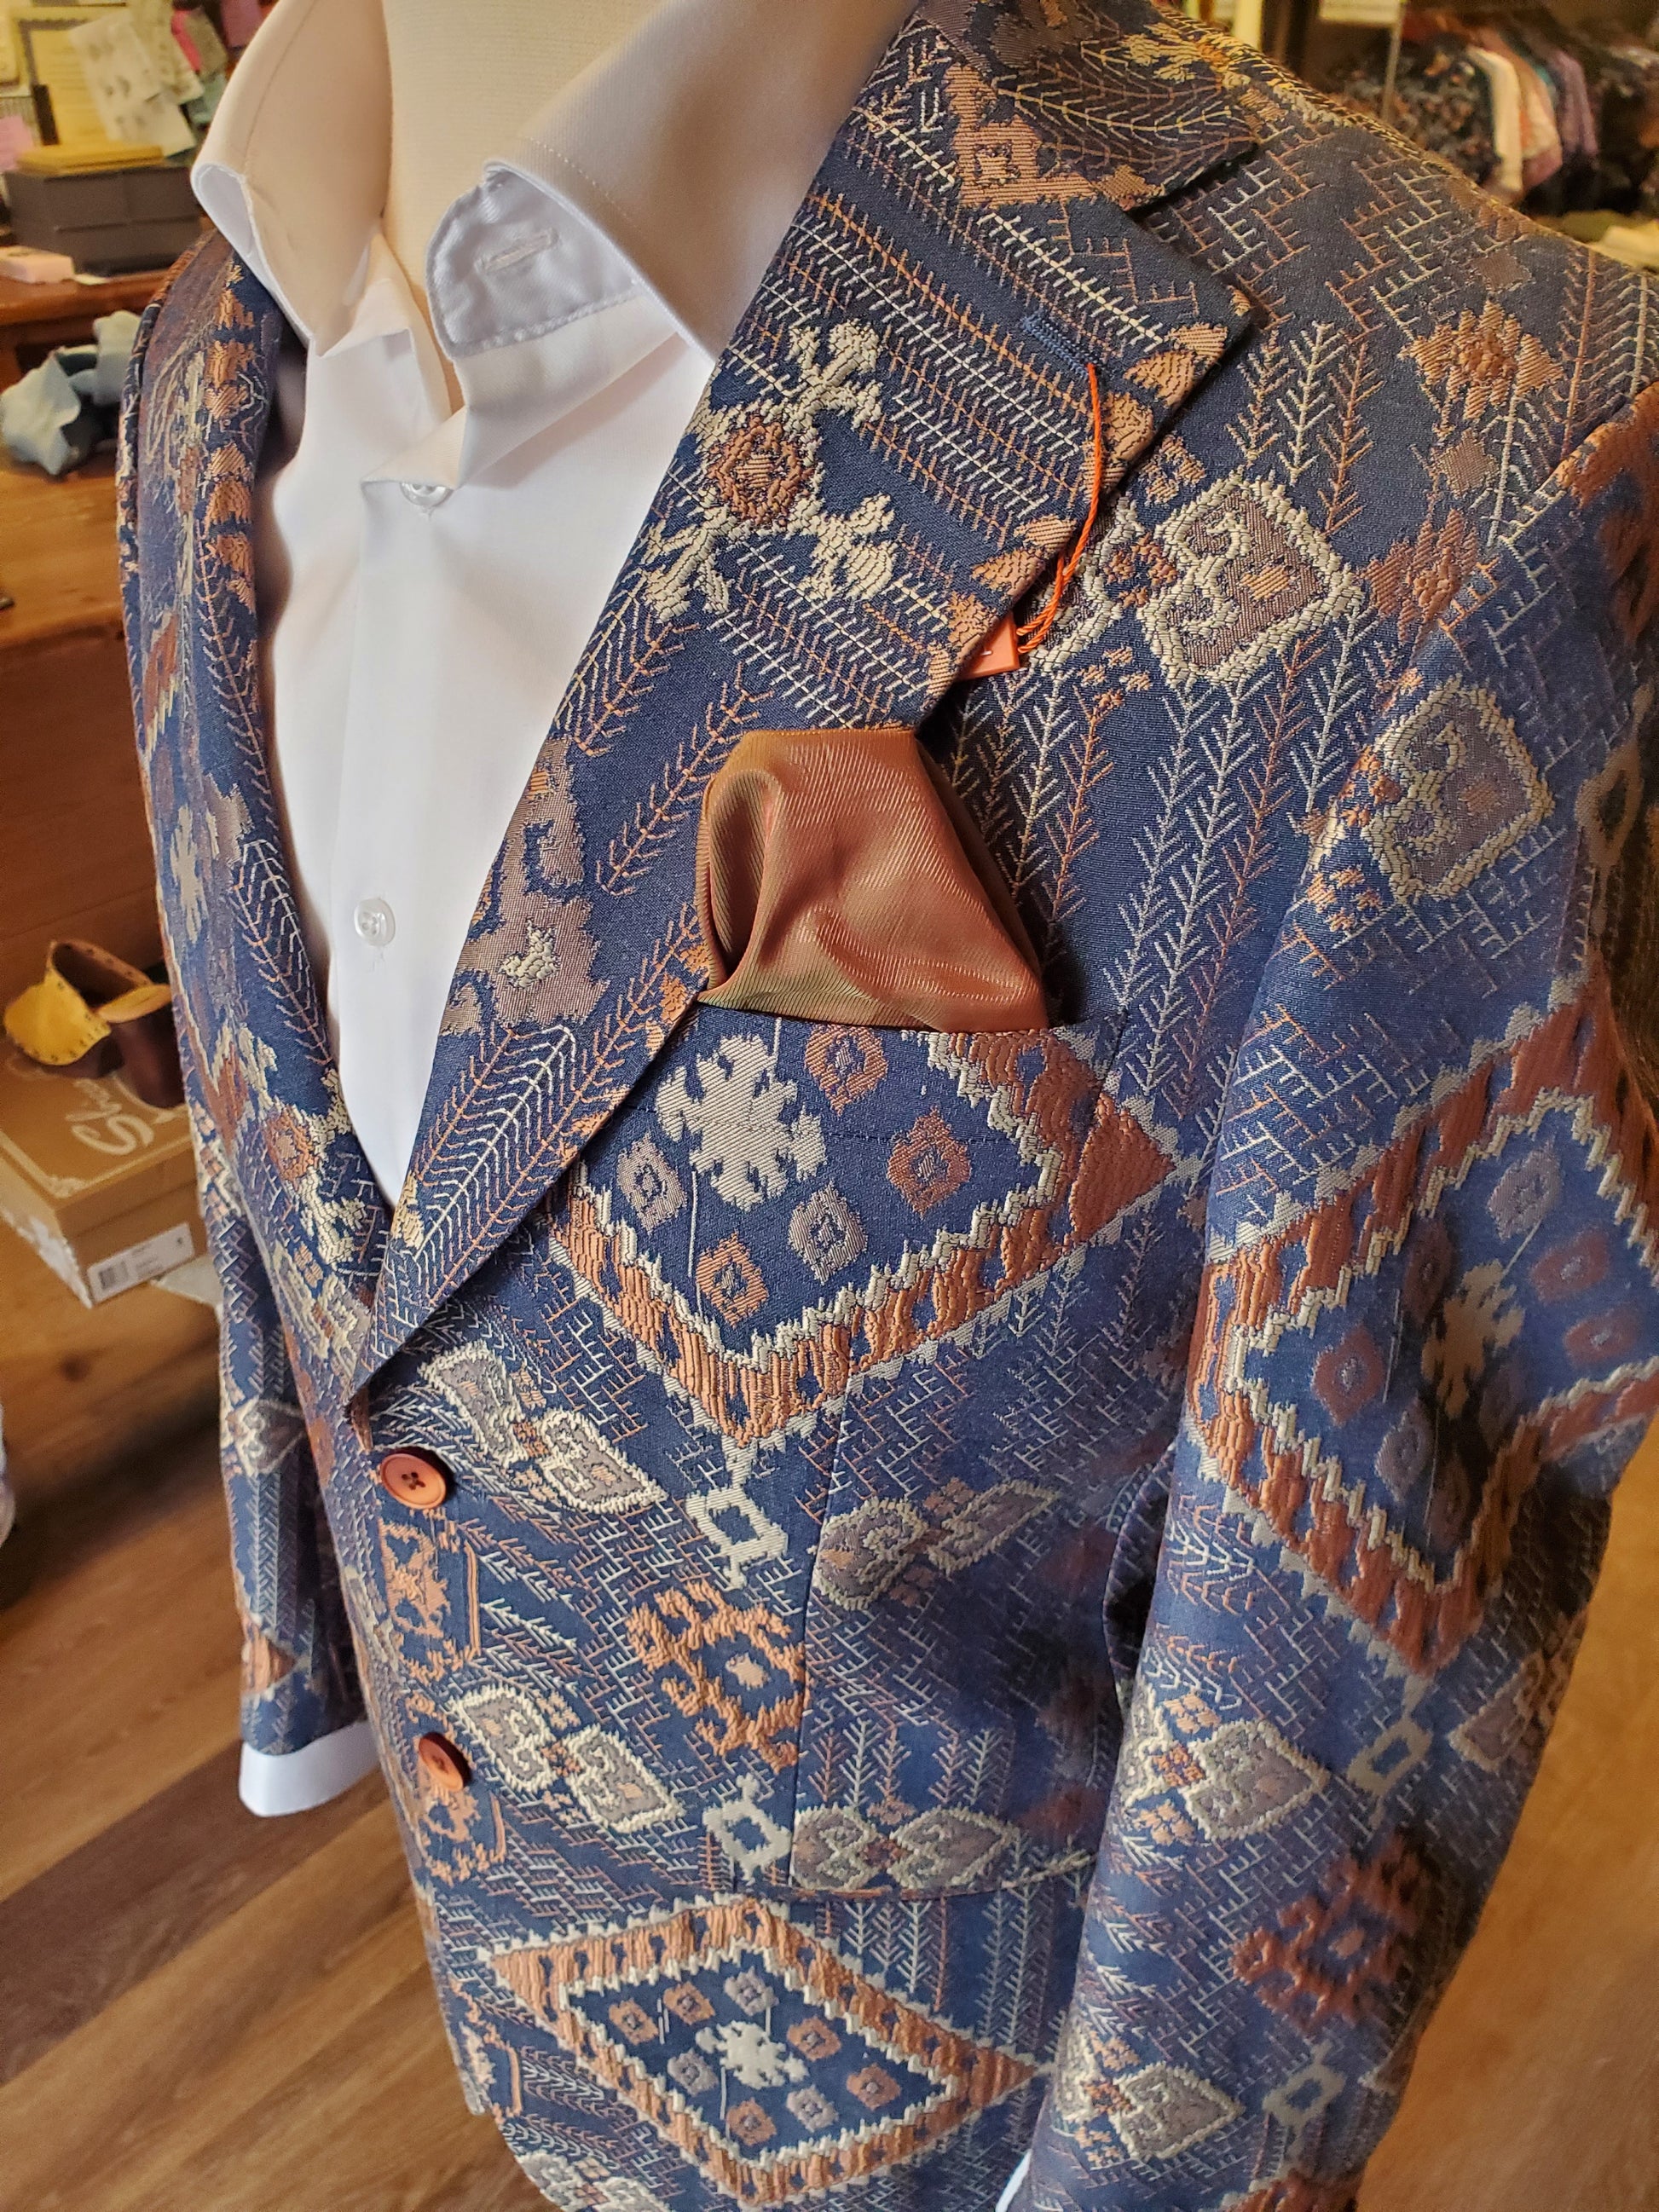 Fancy jacquard embroidered blue and bronze specialty sports jacket, cut to order. Mackinac Island boutique